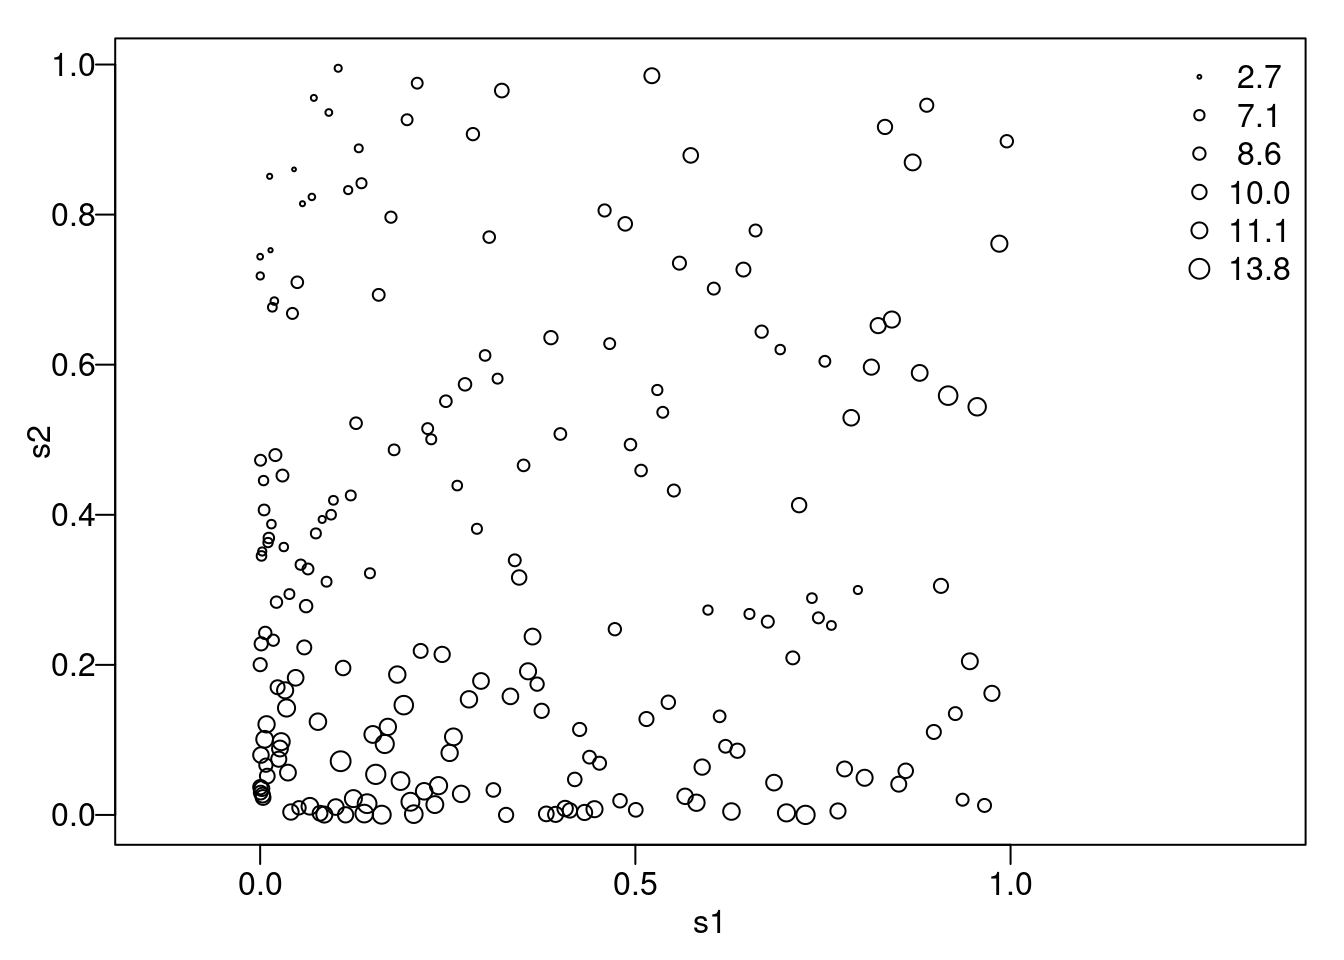 The simulated toy example data.